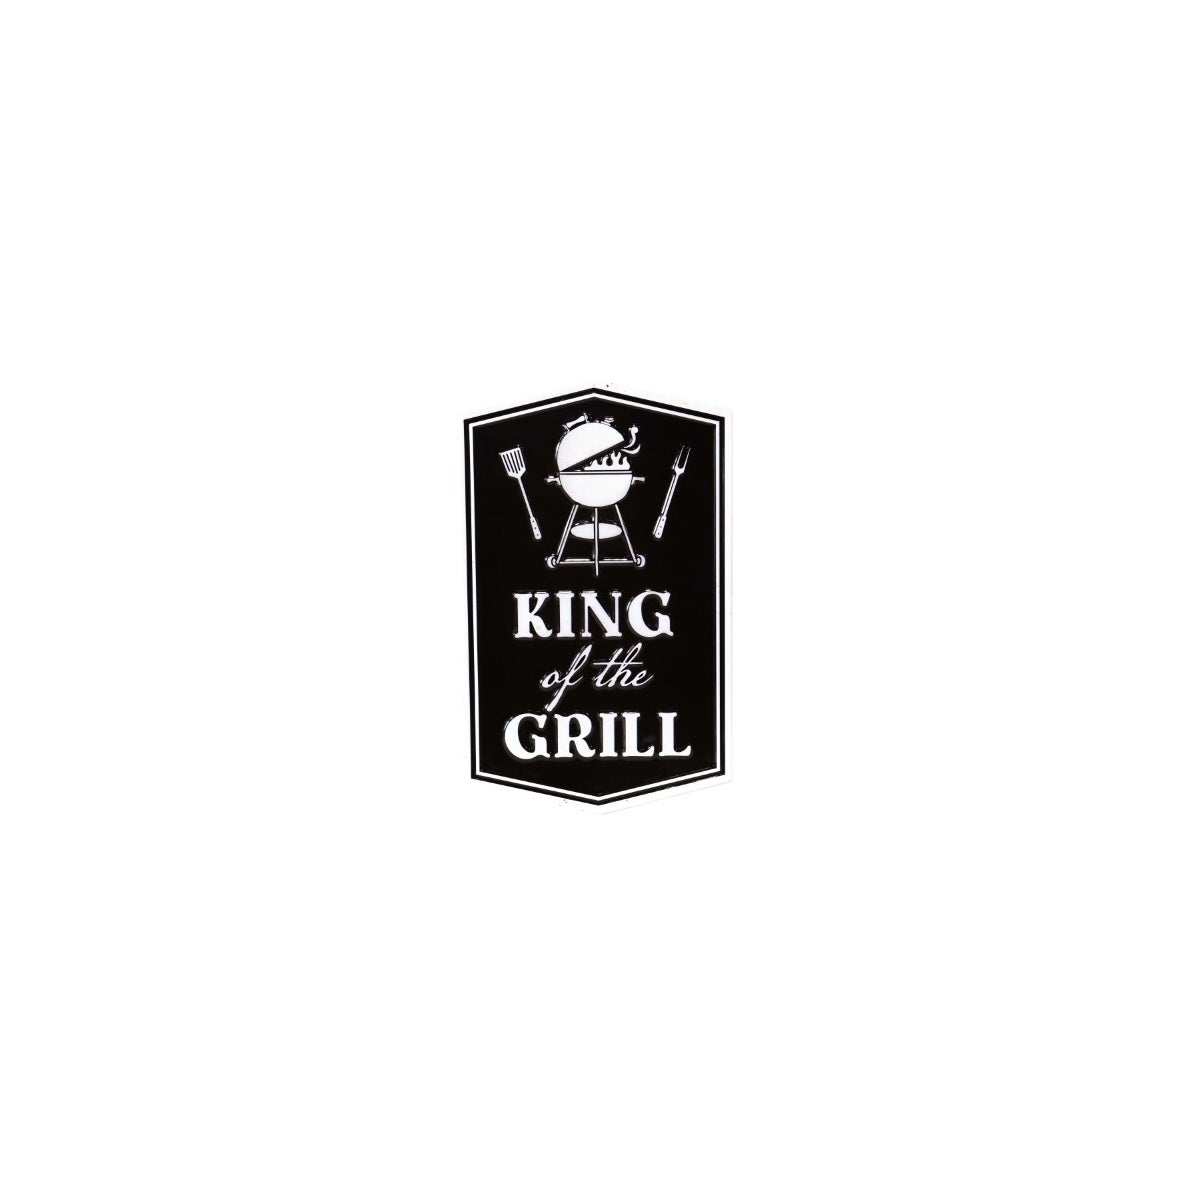 King Of The Grill Metal Sign